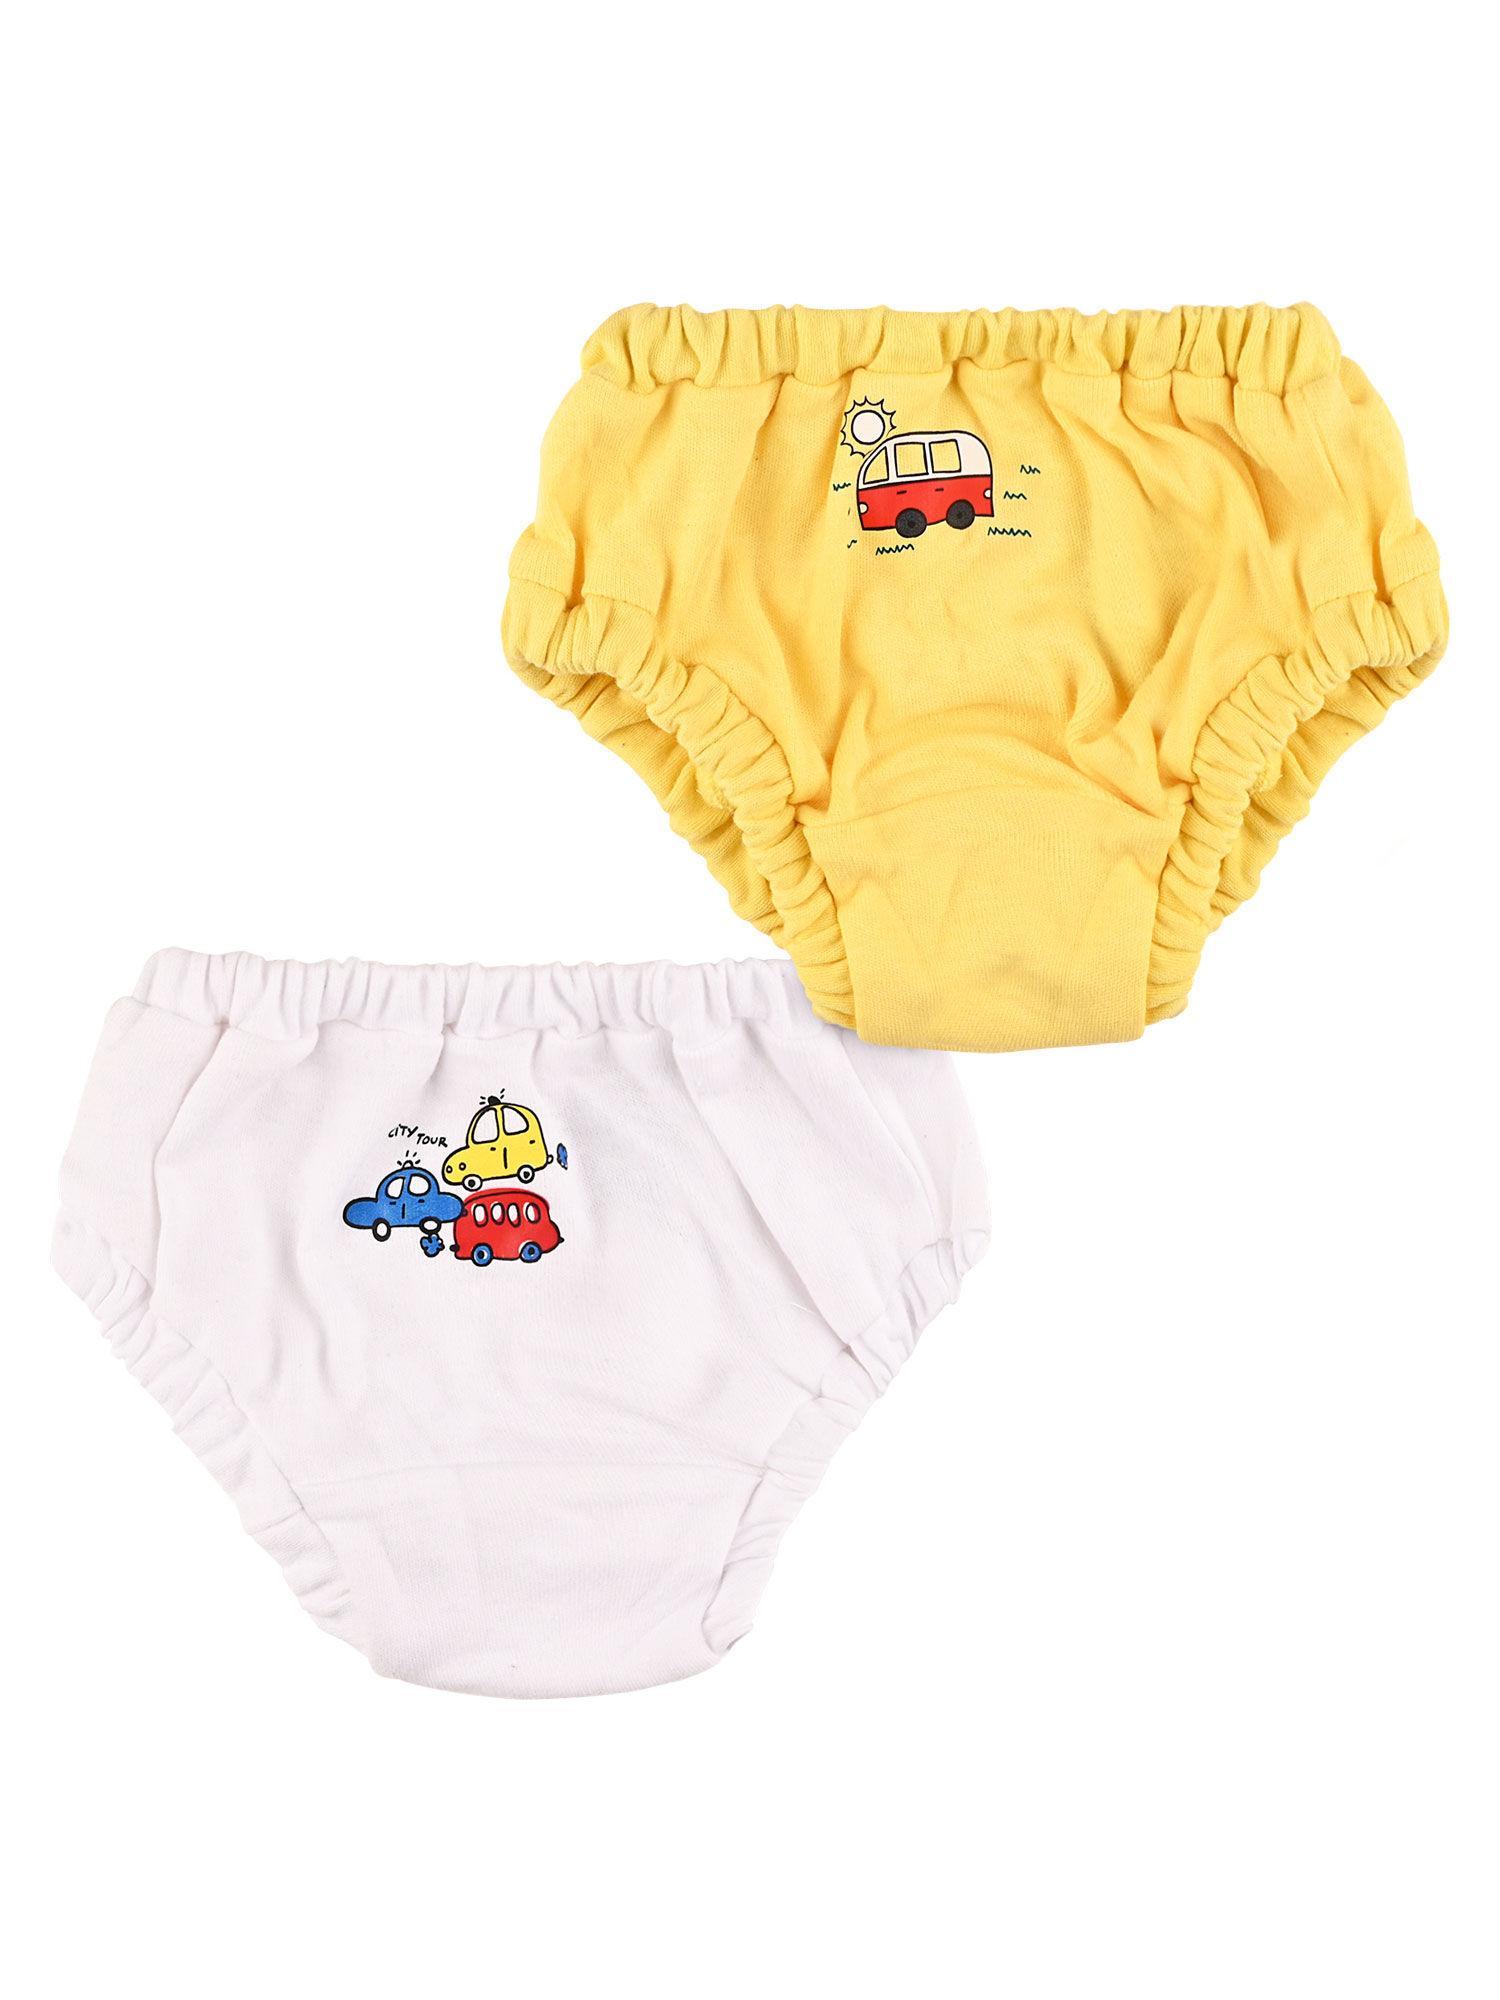 baby boys printed bloomer brief underwear yellow and white (pack of 2)